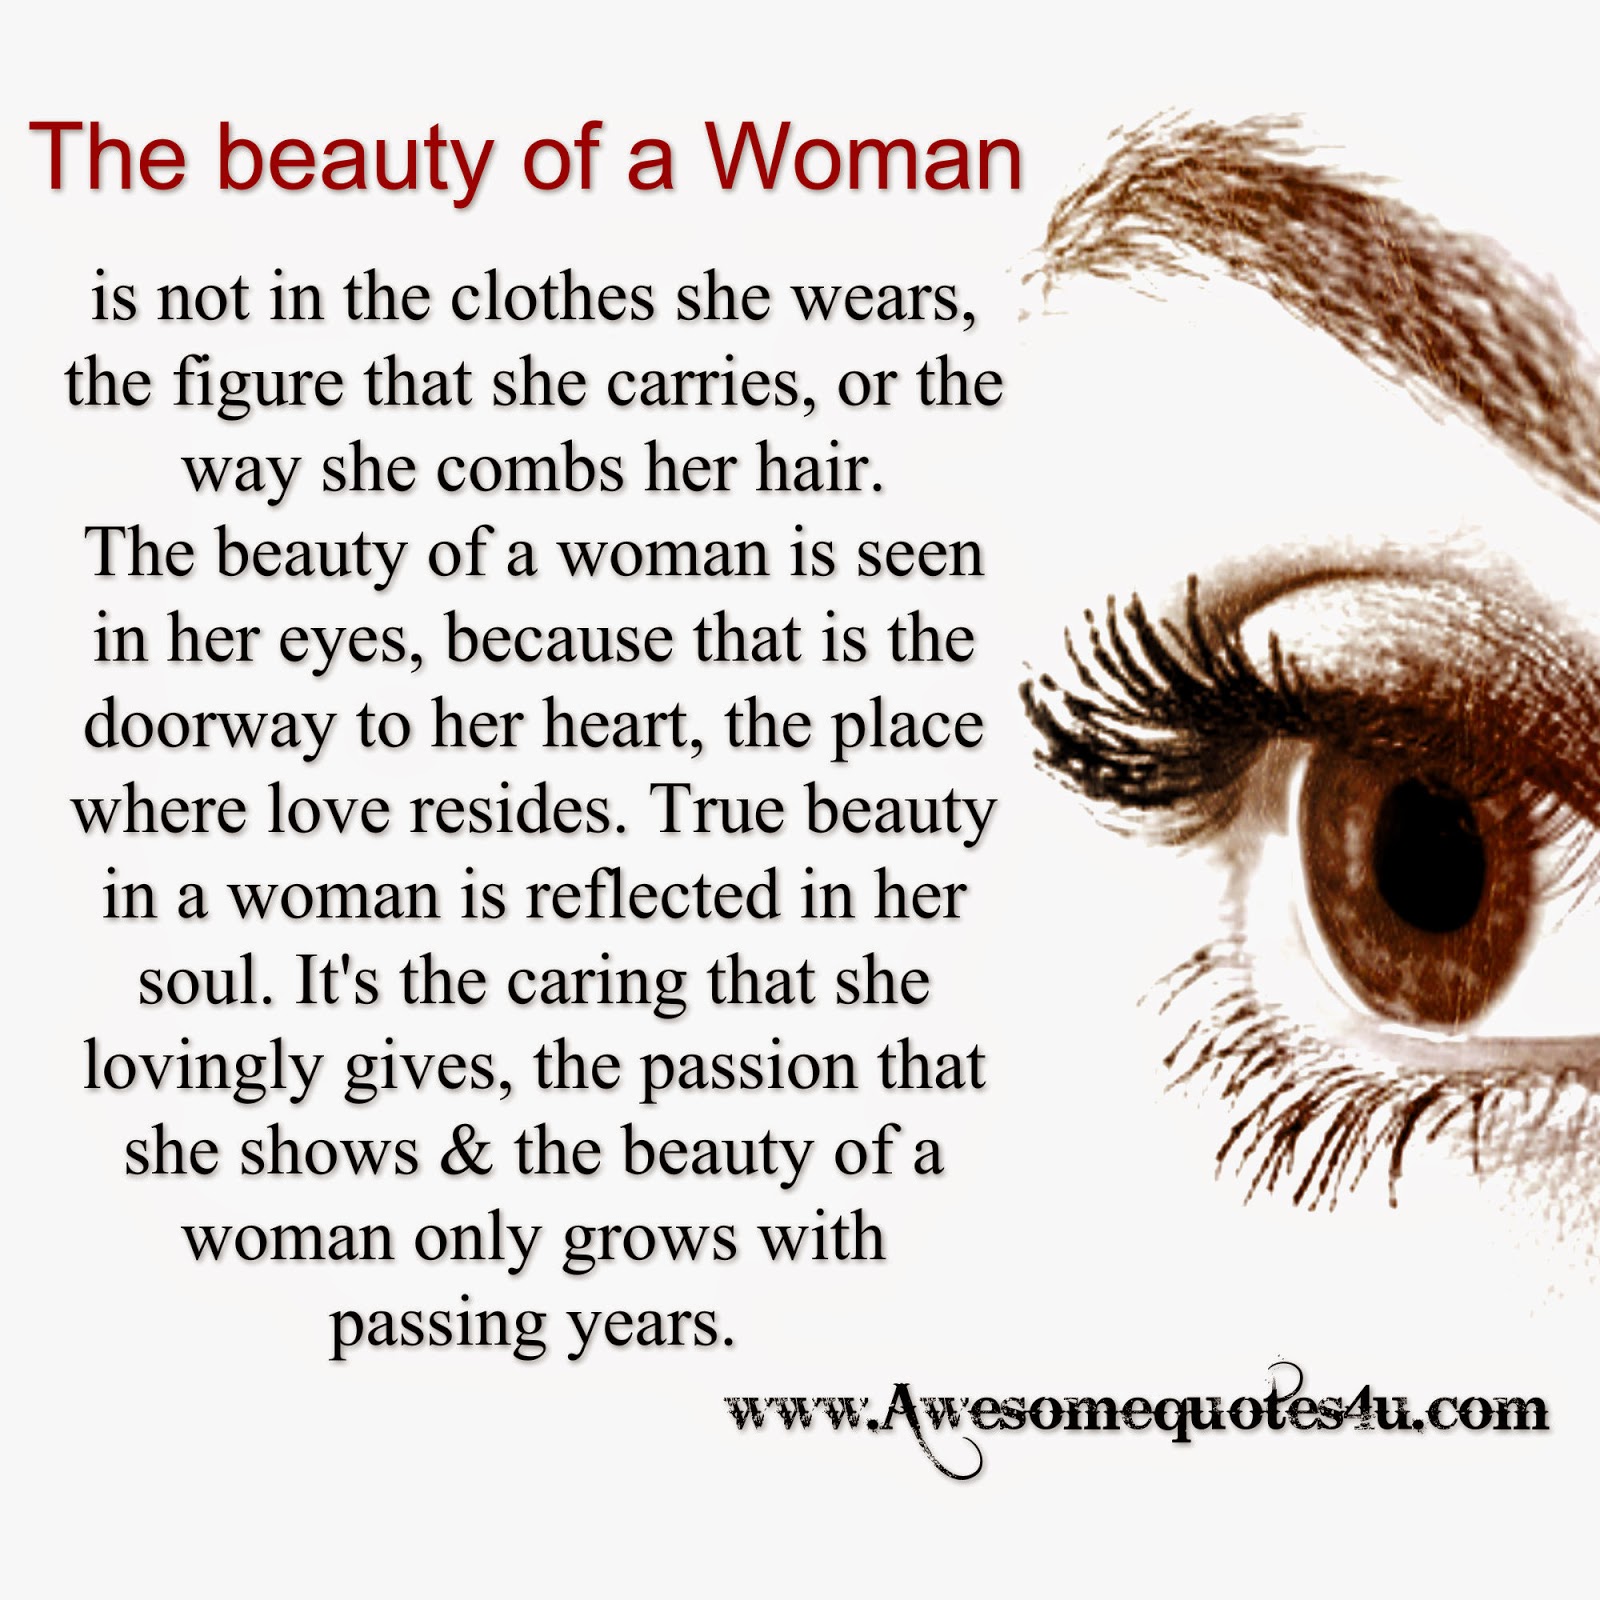 Awesome Quotes: The Beauty of a Woman